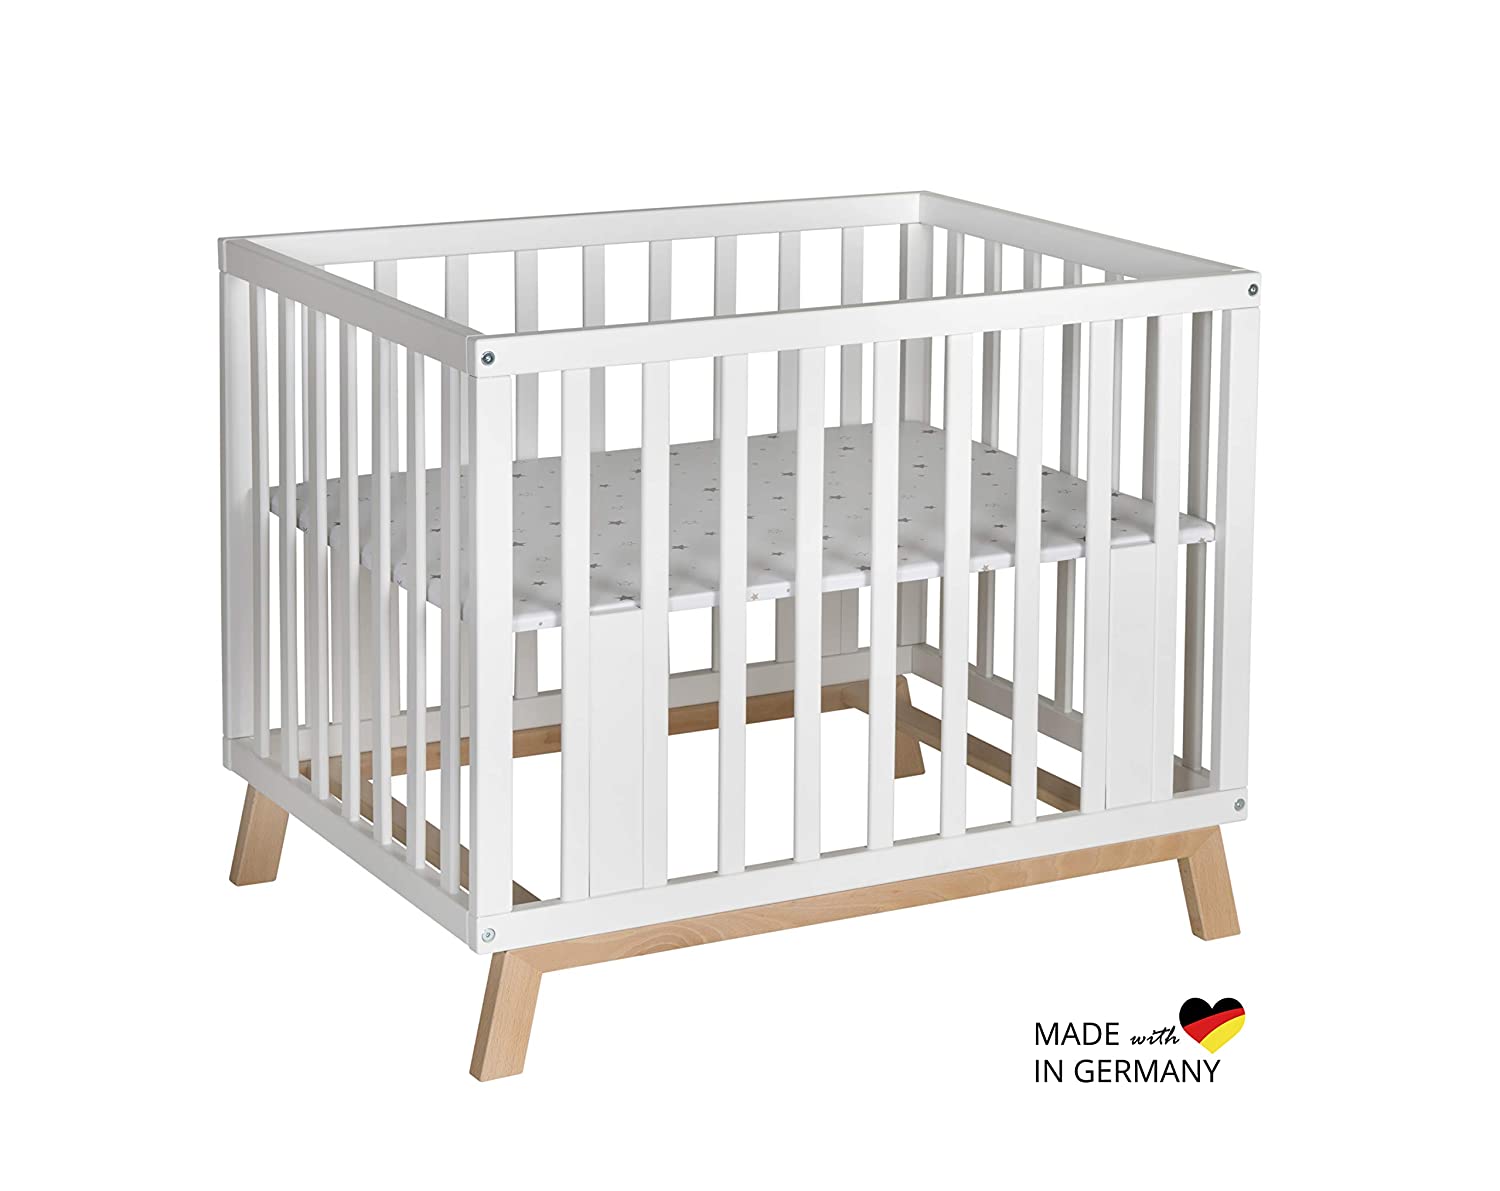 Schardt 02 050 00 87 077 Playpen Holly White/Natural, Solid Beech Wood, Foil Star Grey, Made in Germany, Beige